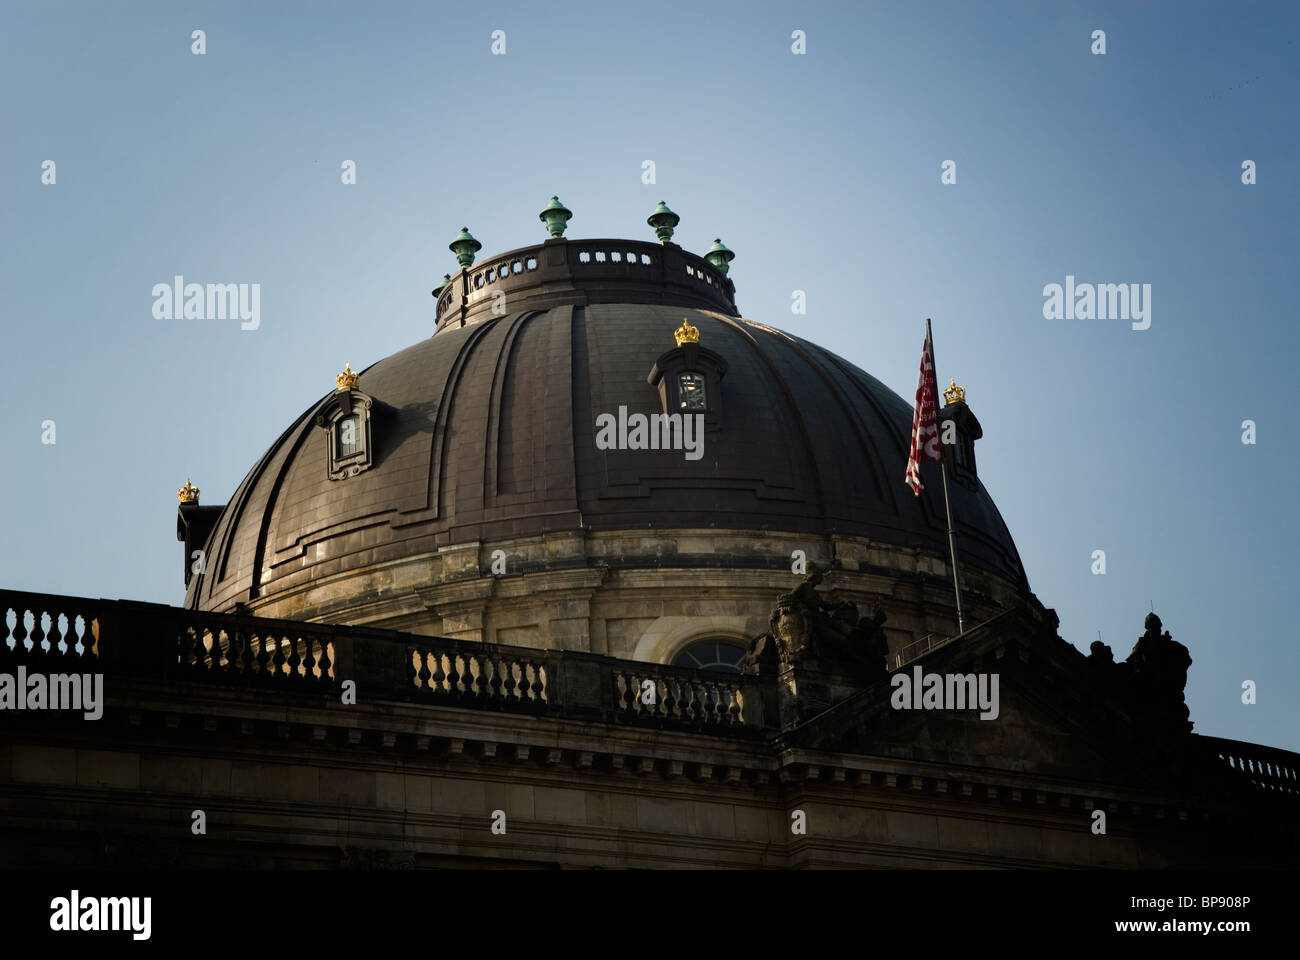 Bode museum dome Berlin Germany Europe Stock Photo